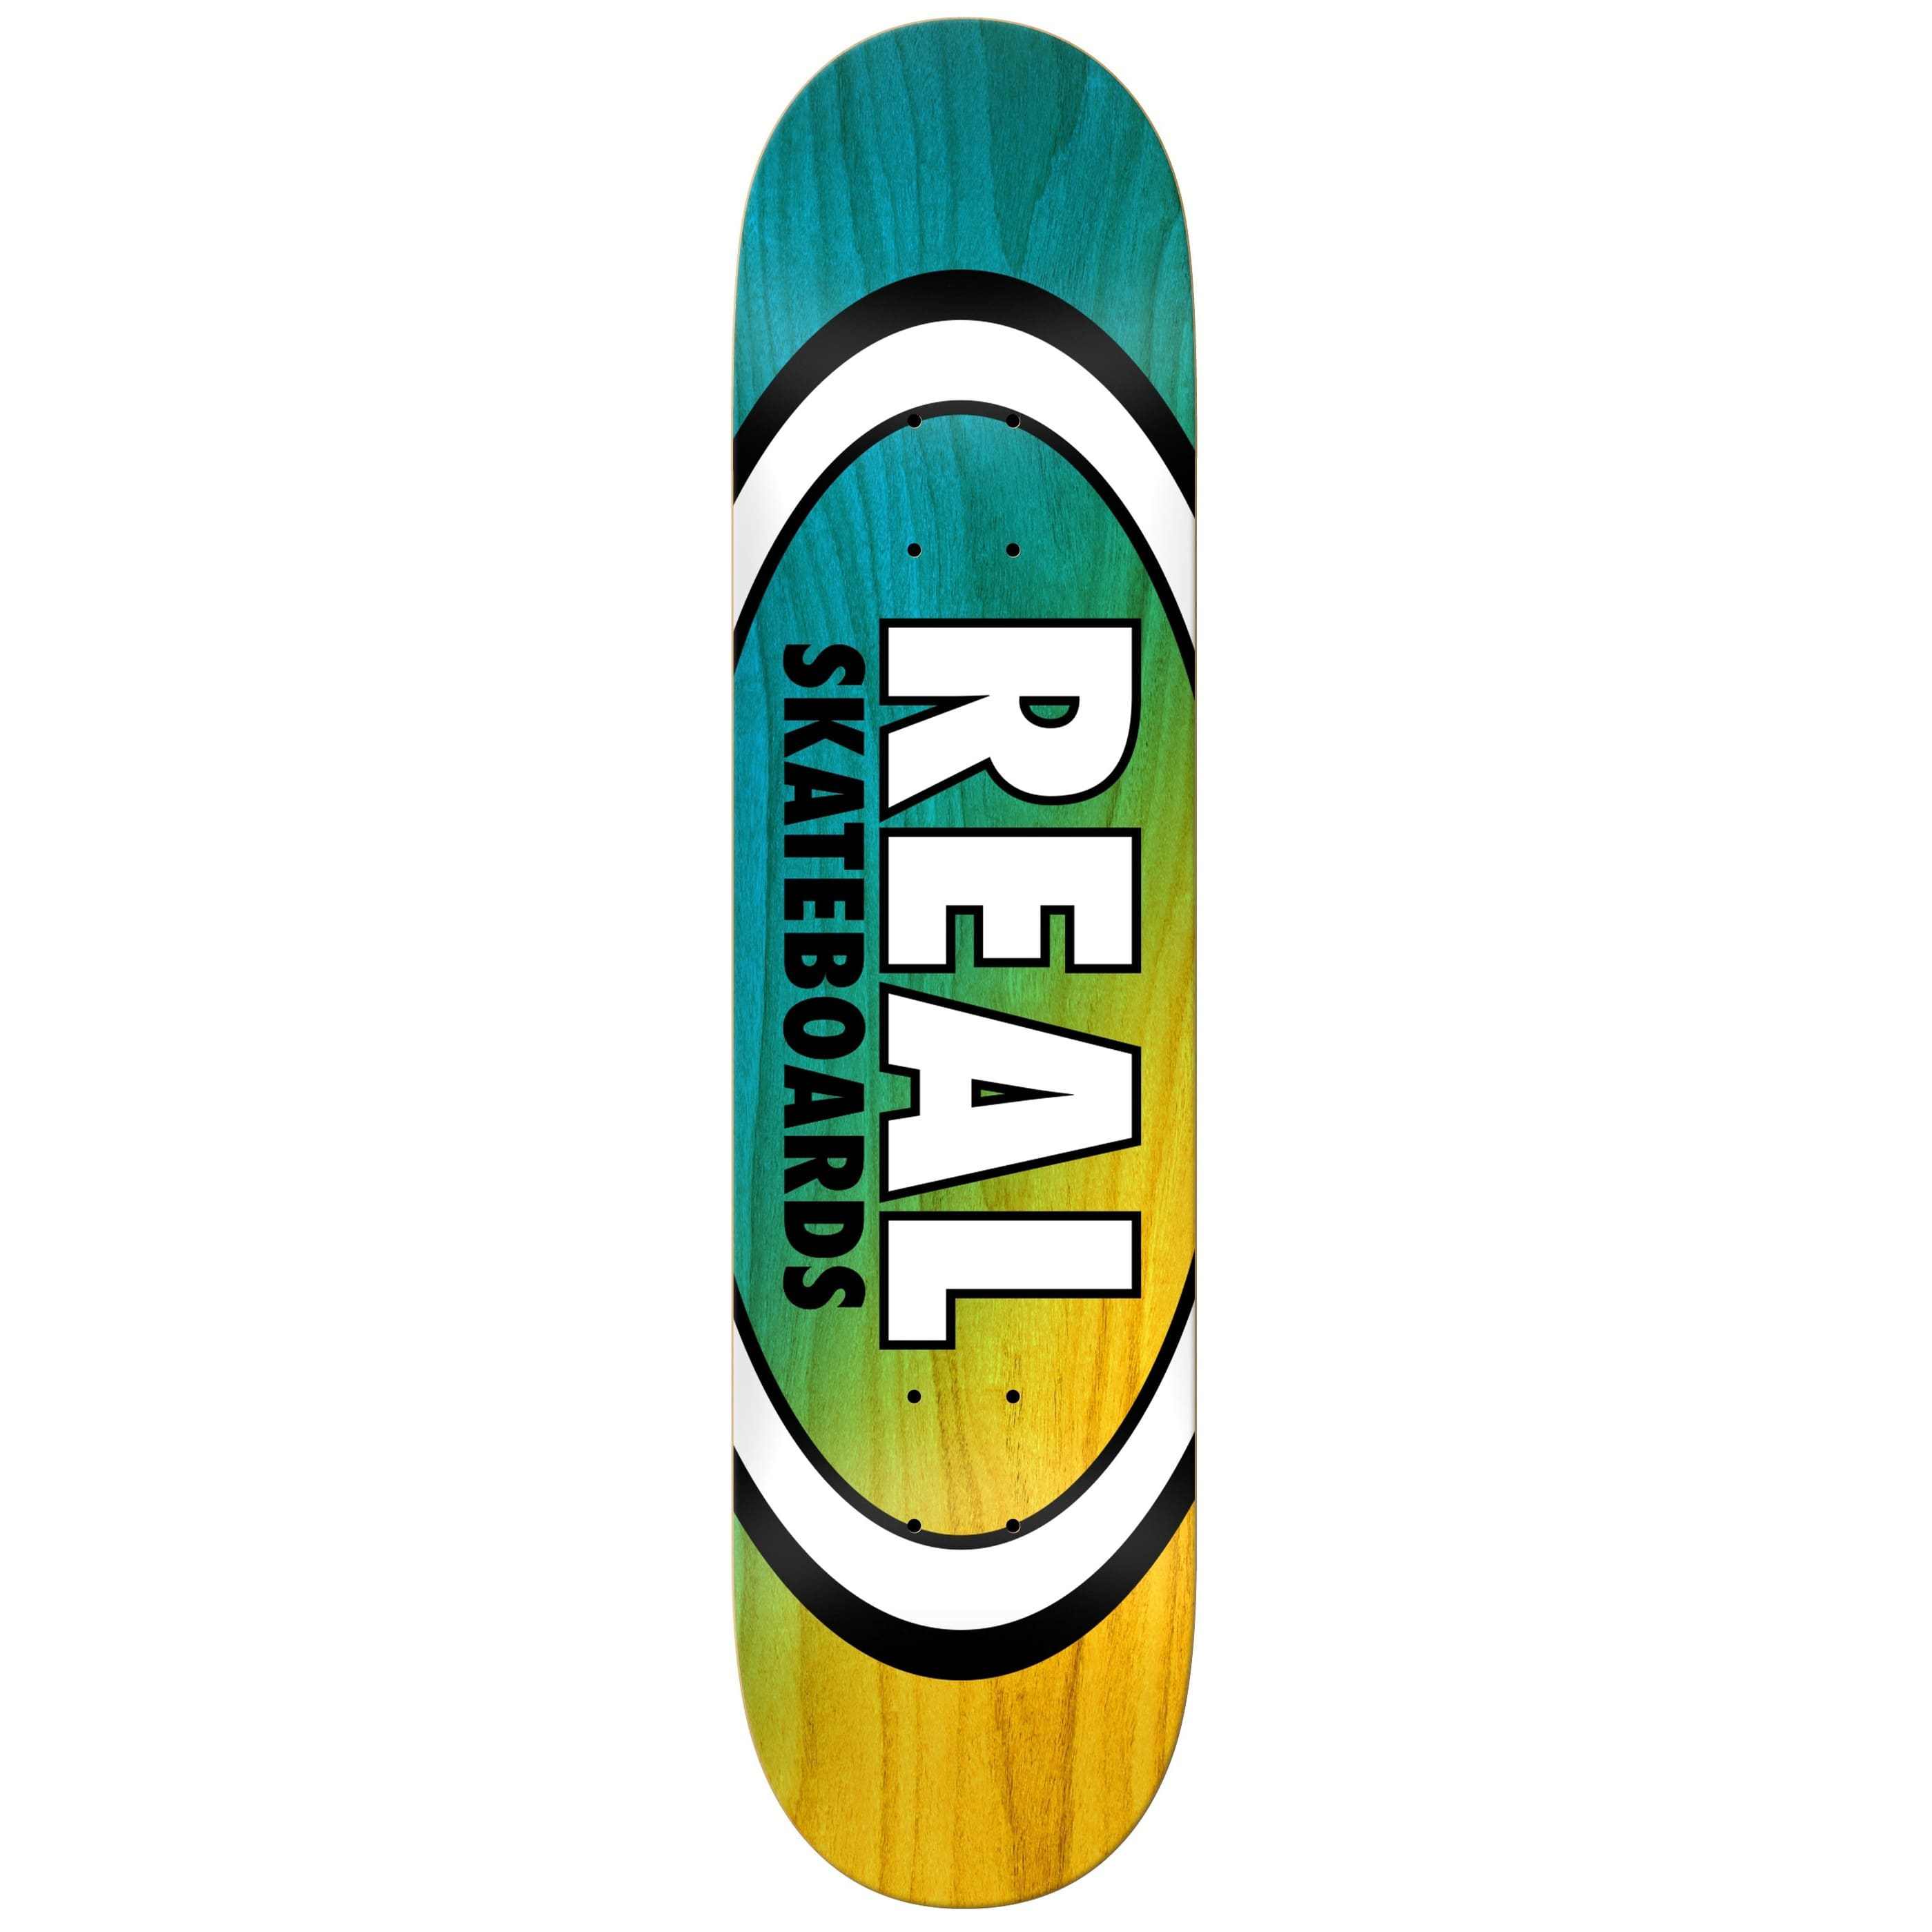 Blue with Yellow Oval Logo - Real Angle Dip Oval Blue and Yellow 8.25 Skate Deck.co.uk